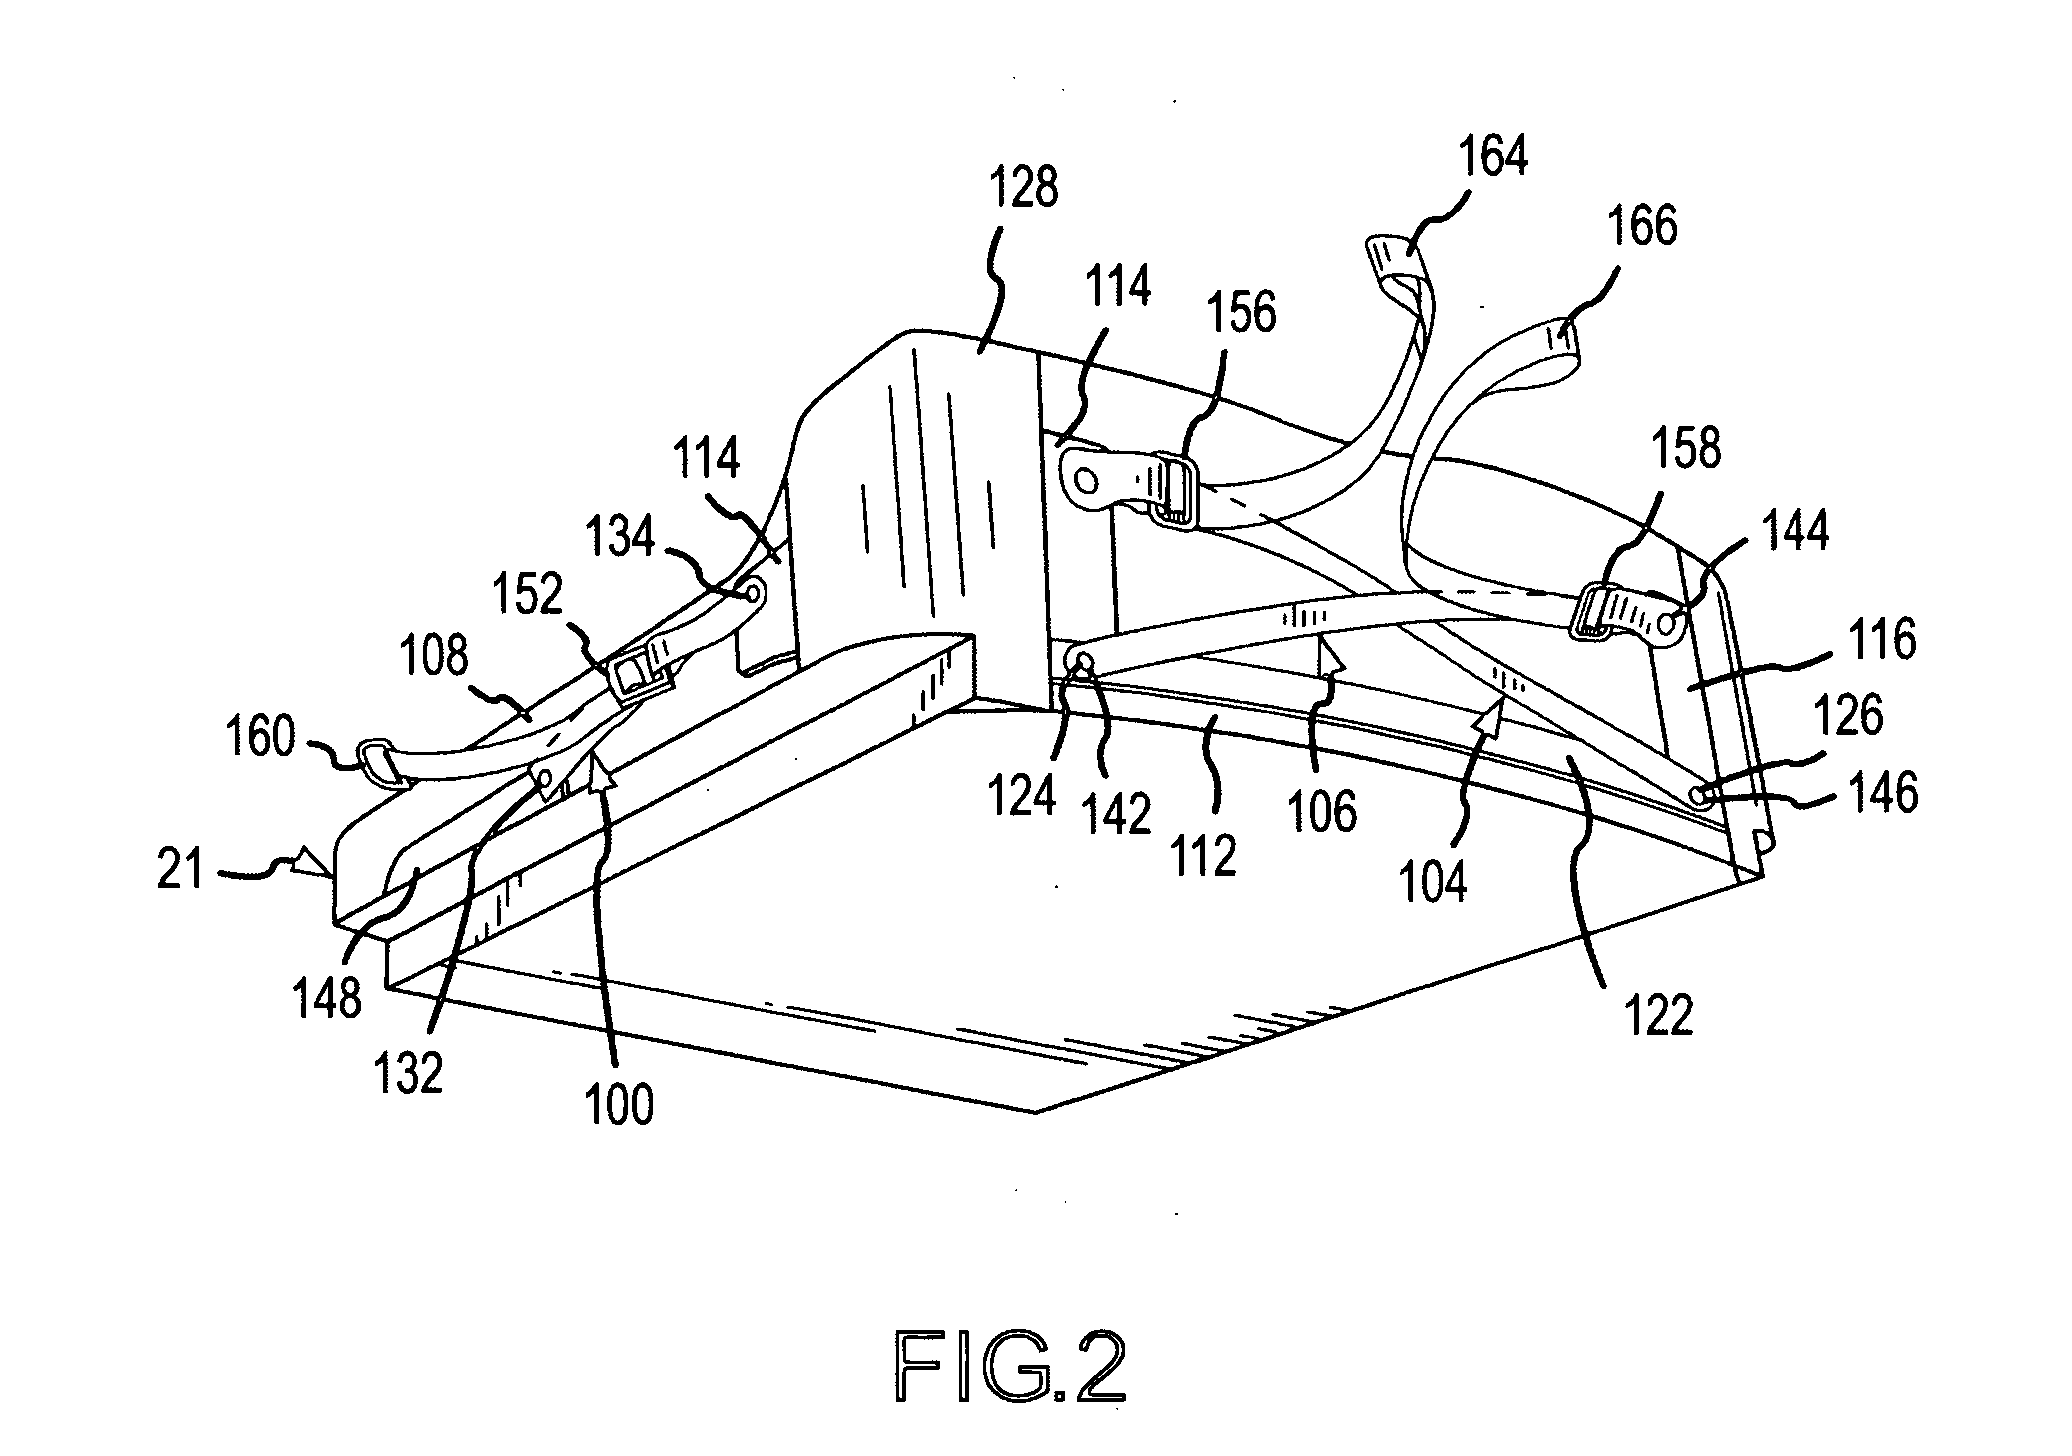 Reinforced and adjustable contoured seat cushion and method of reinforcing and adjusting the contoured seat cushion